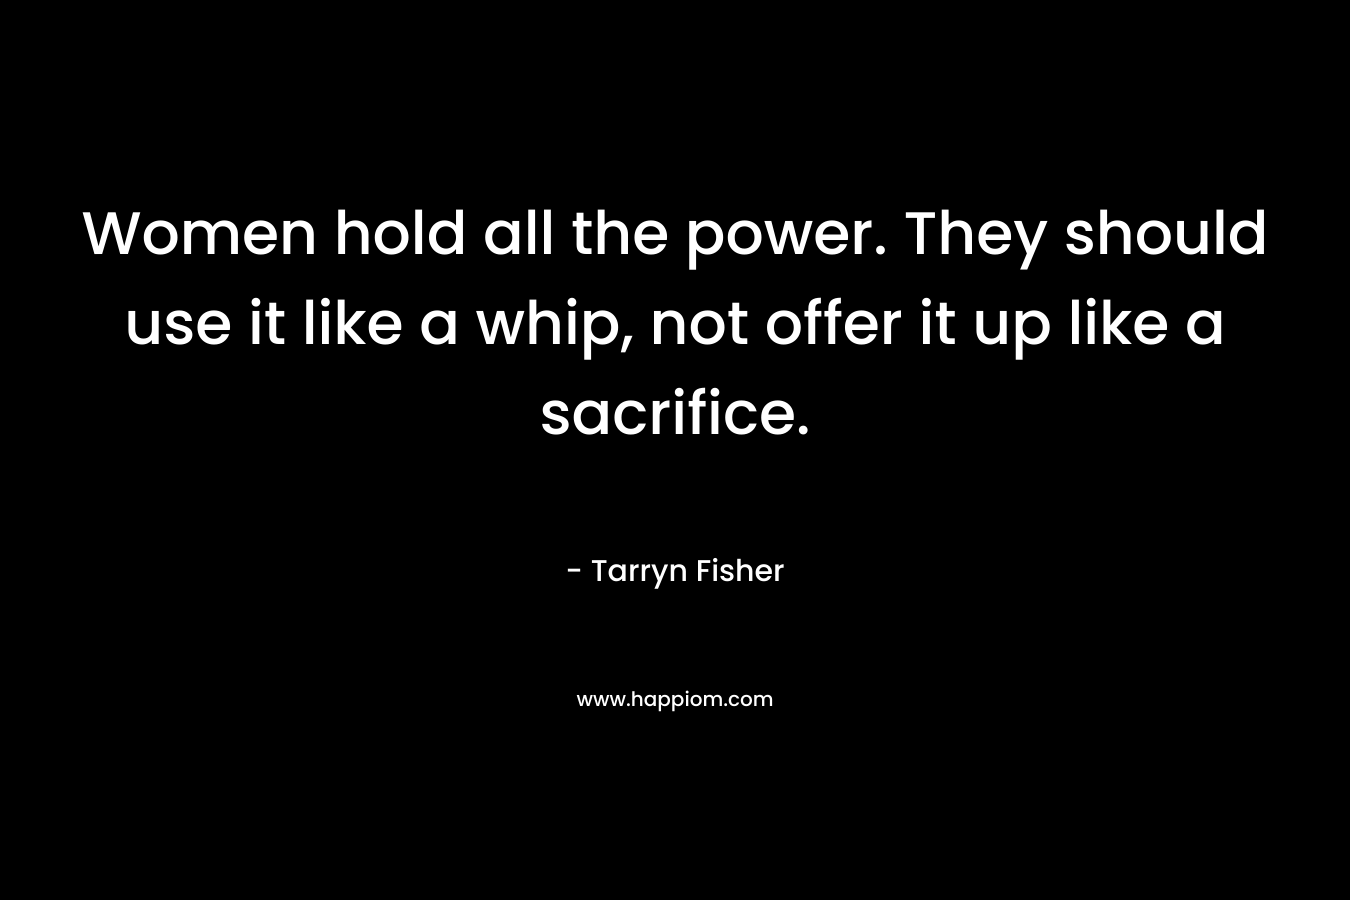 Women hold all the power. They should use it like a whip, not offer it up like a sacrifice. – Tarryn Fisher